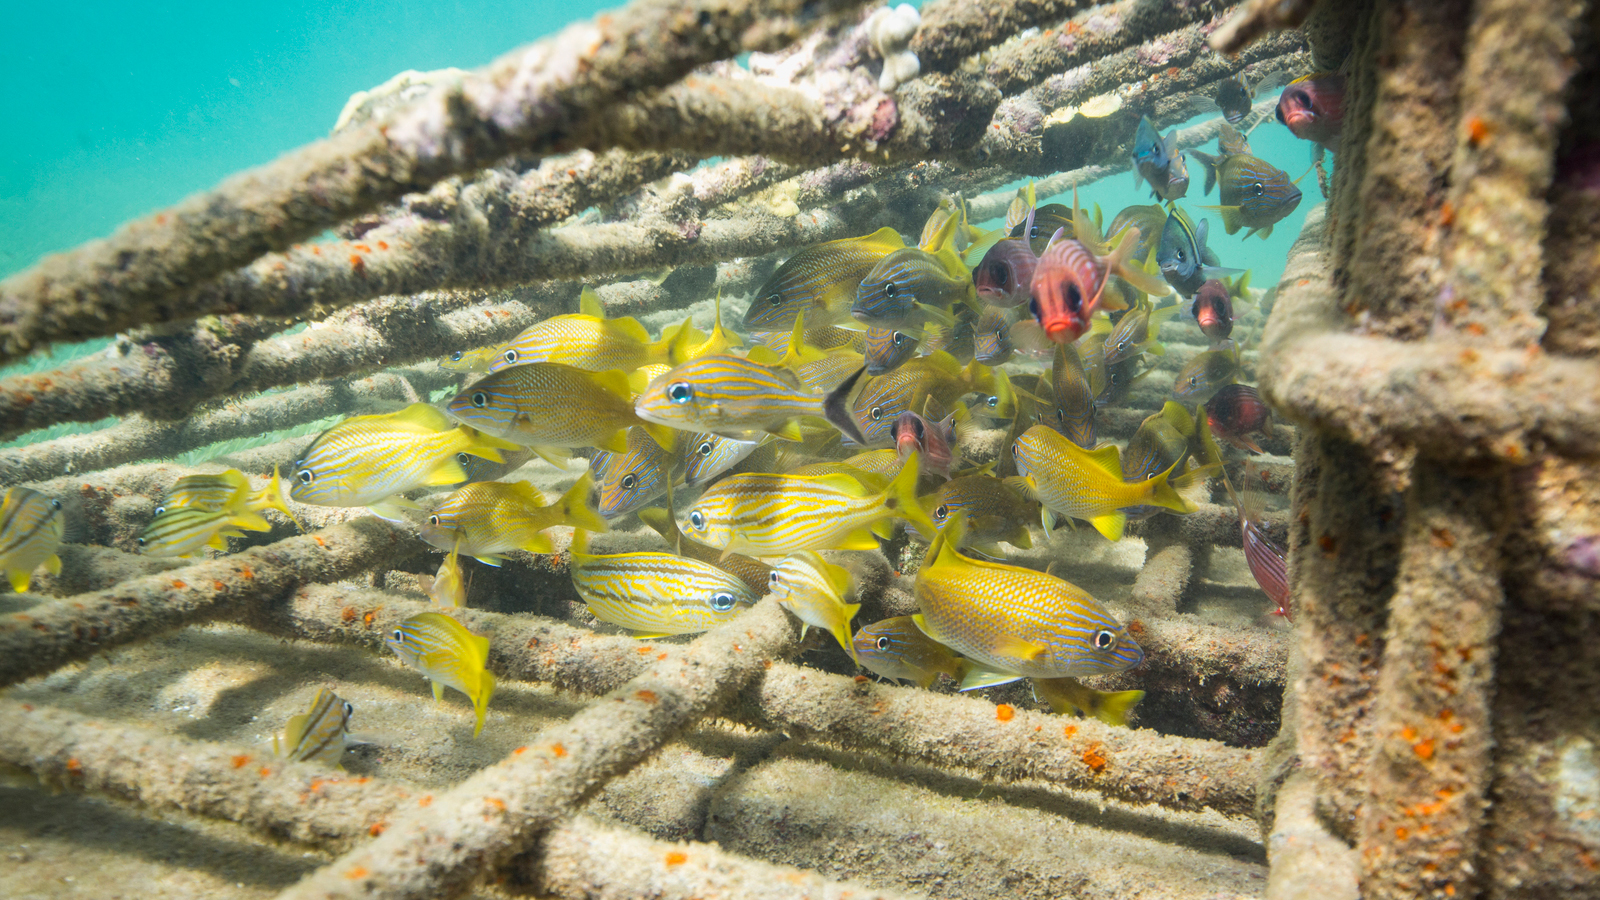 Pilot hybrid or 'artificial' reef structures, built with steel cages and filled with stones and cement, were installed in 2015 in Grenville Bay, Grenada to protect a vulnerable coastline from strong wave action and the impacts from climate change, such as severe erosion. Photo © Tim Calver